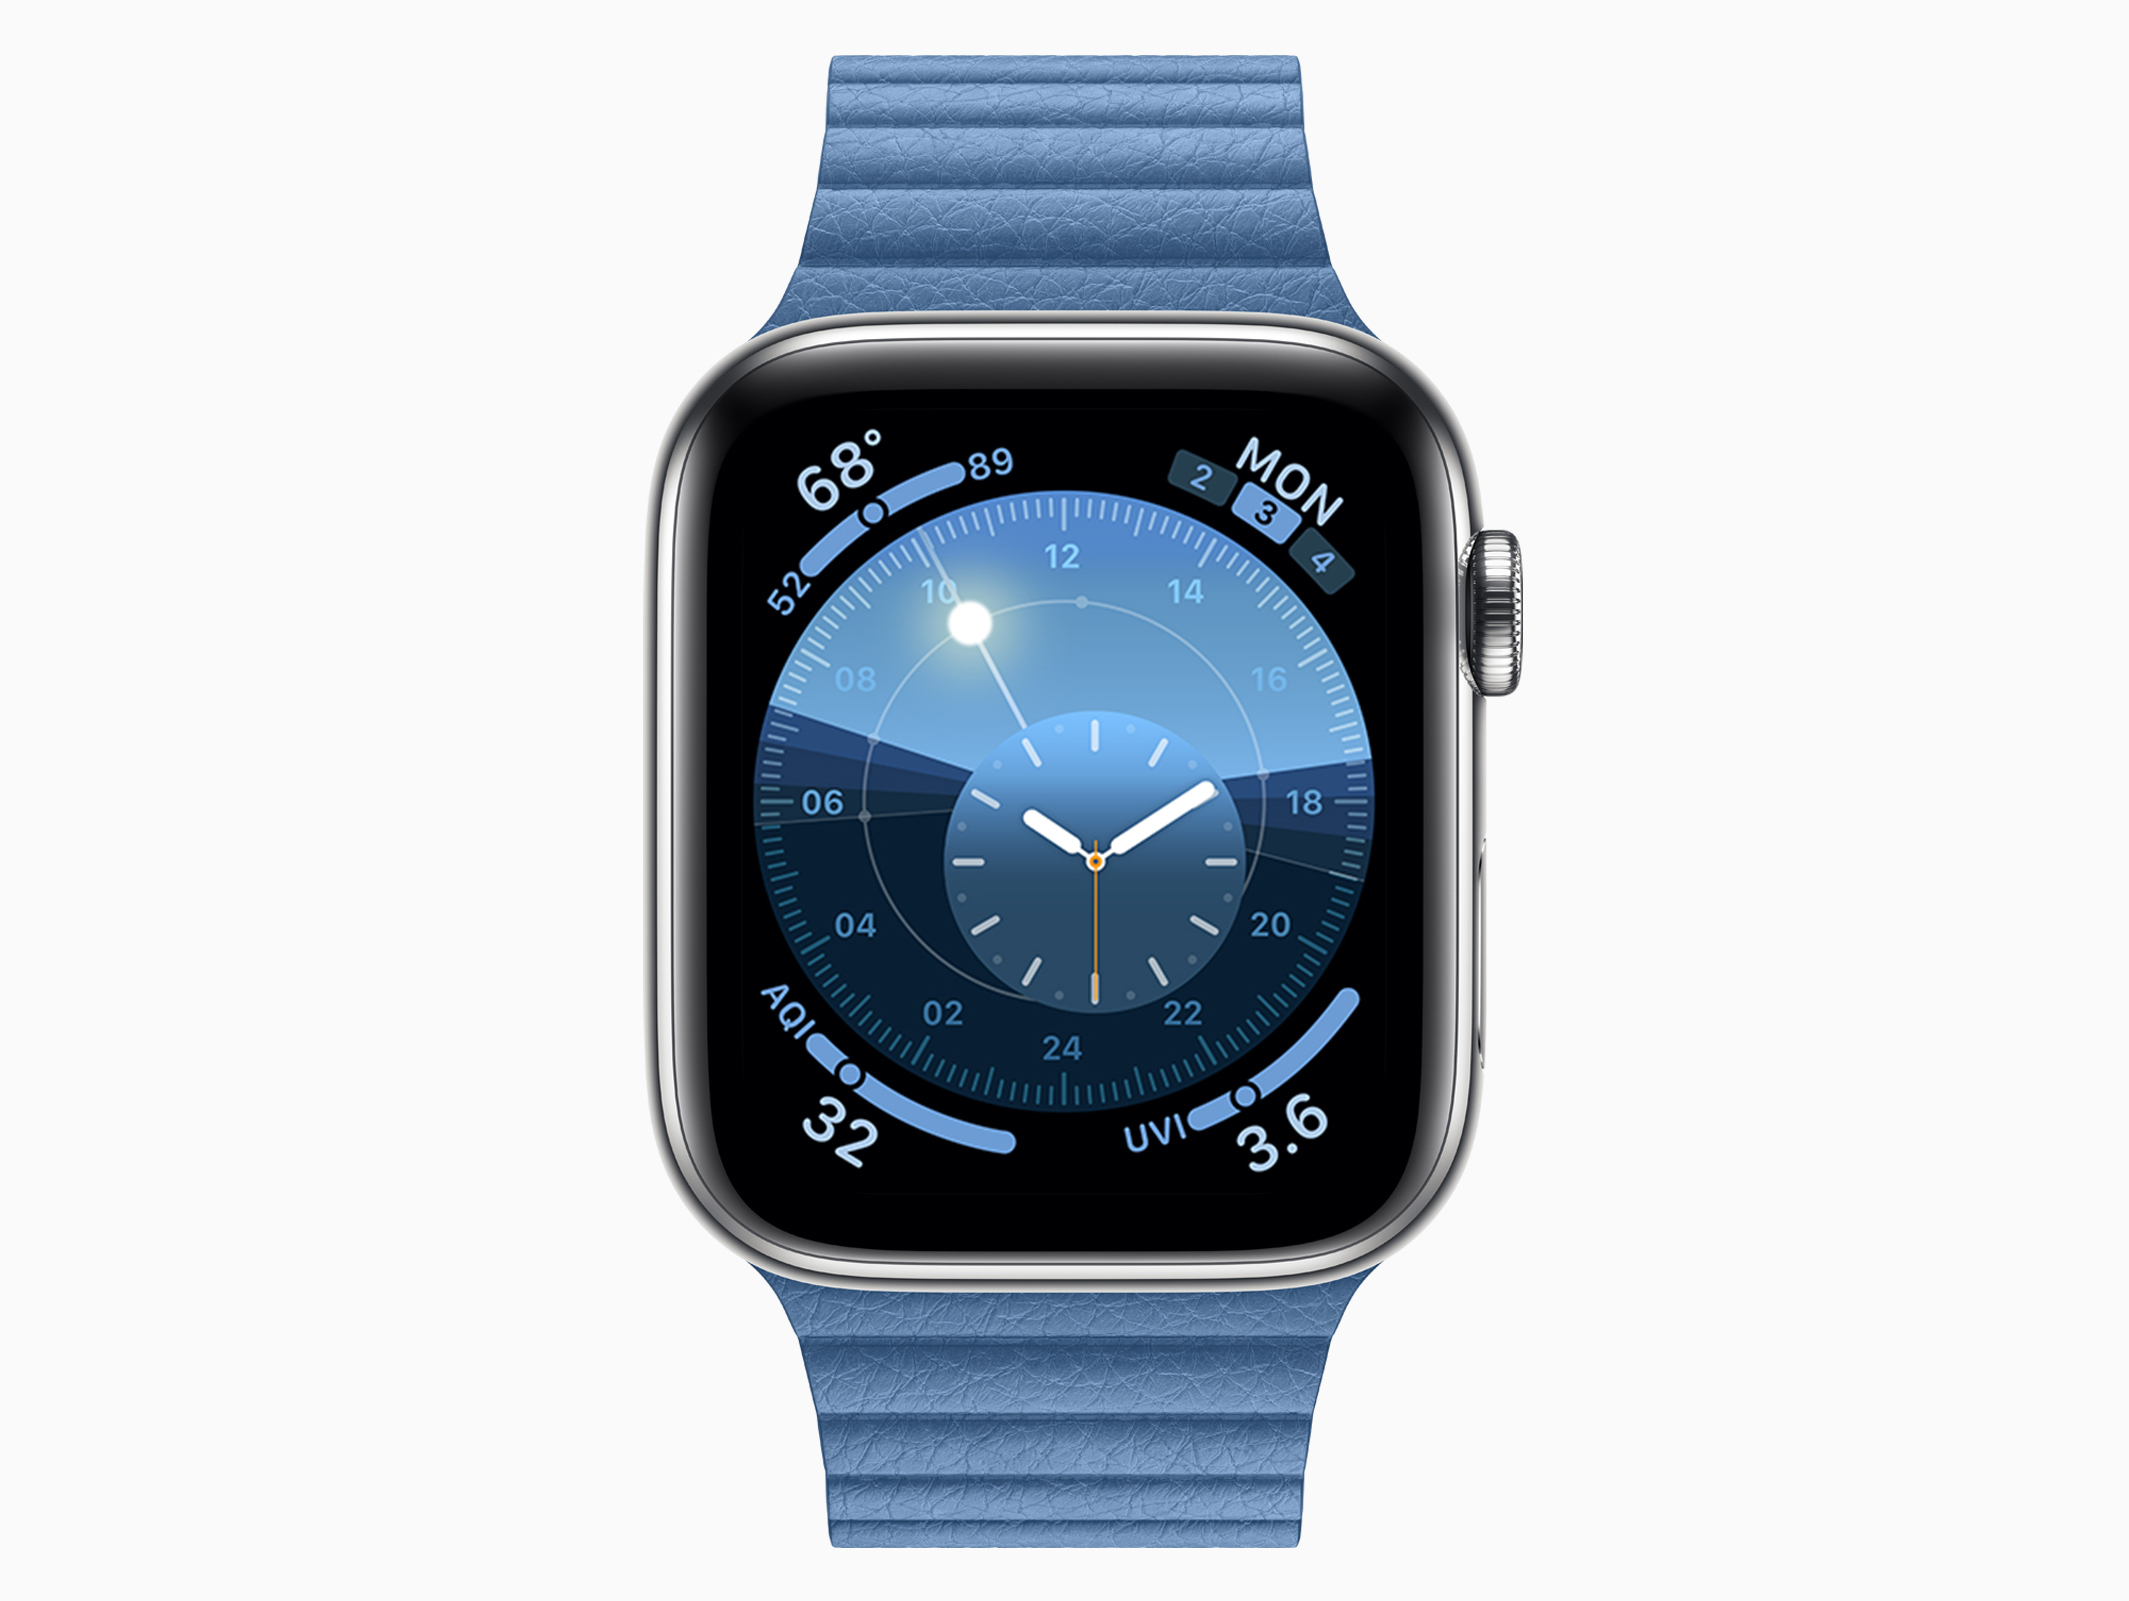 1) New Watch Faces 